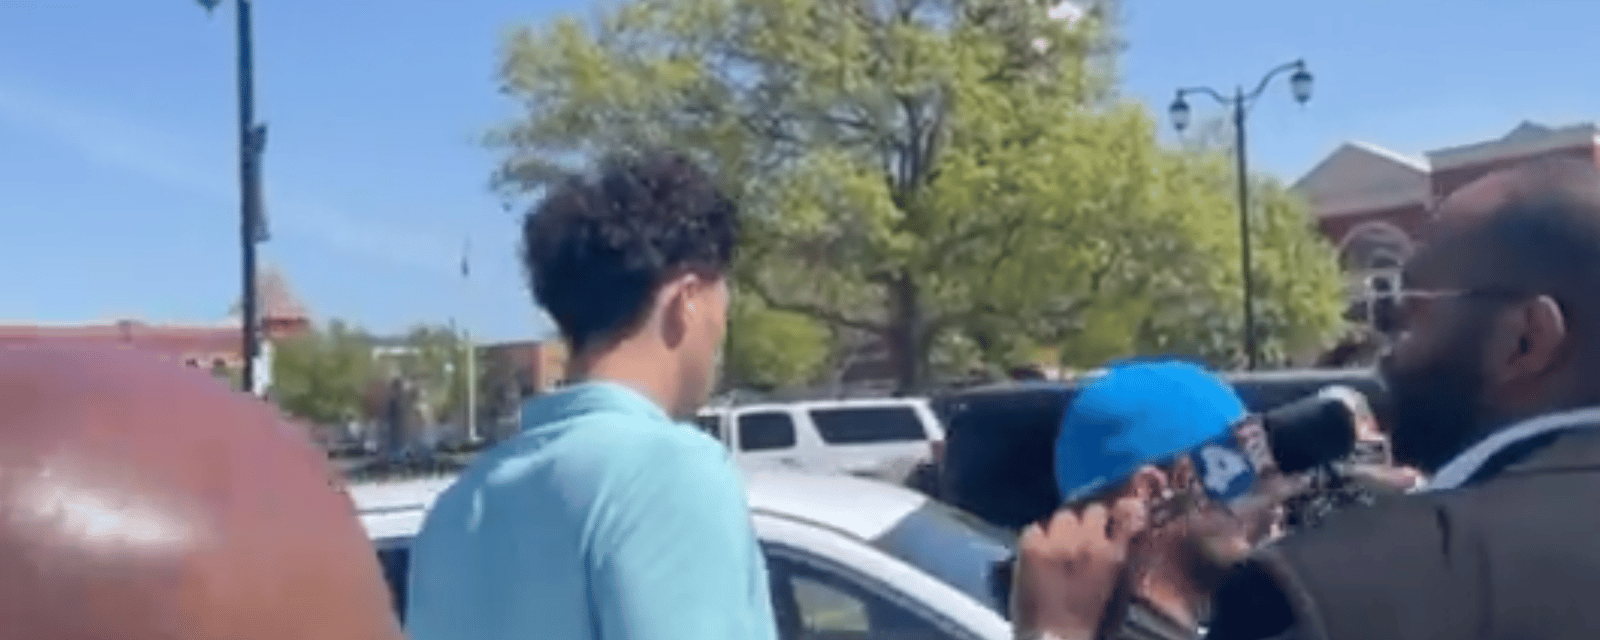 Jackson Mahomes heckled as he leaves jail 